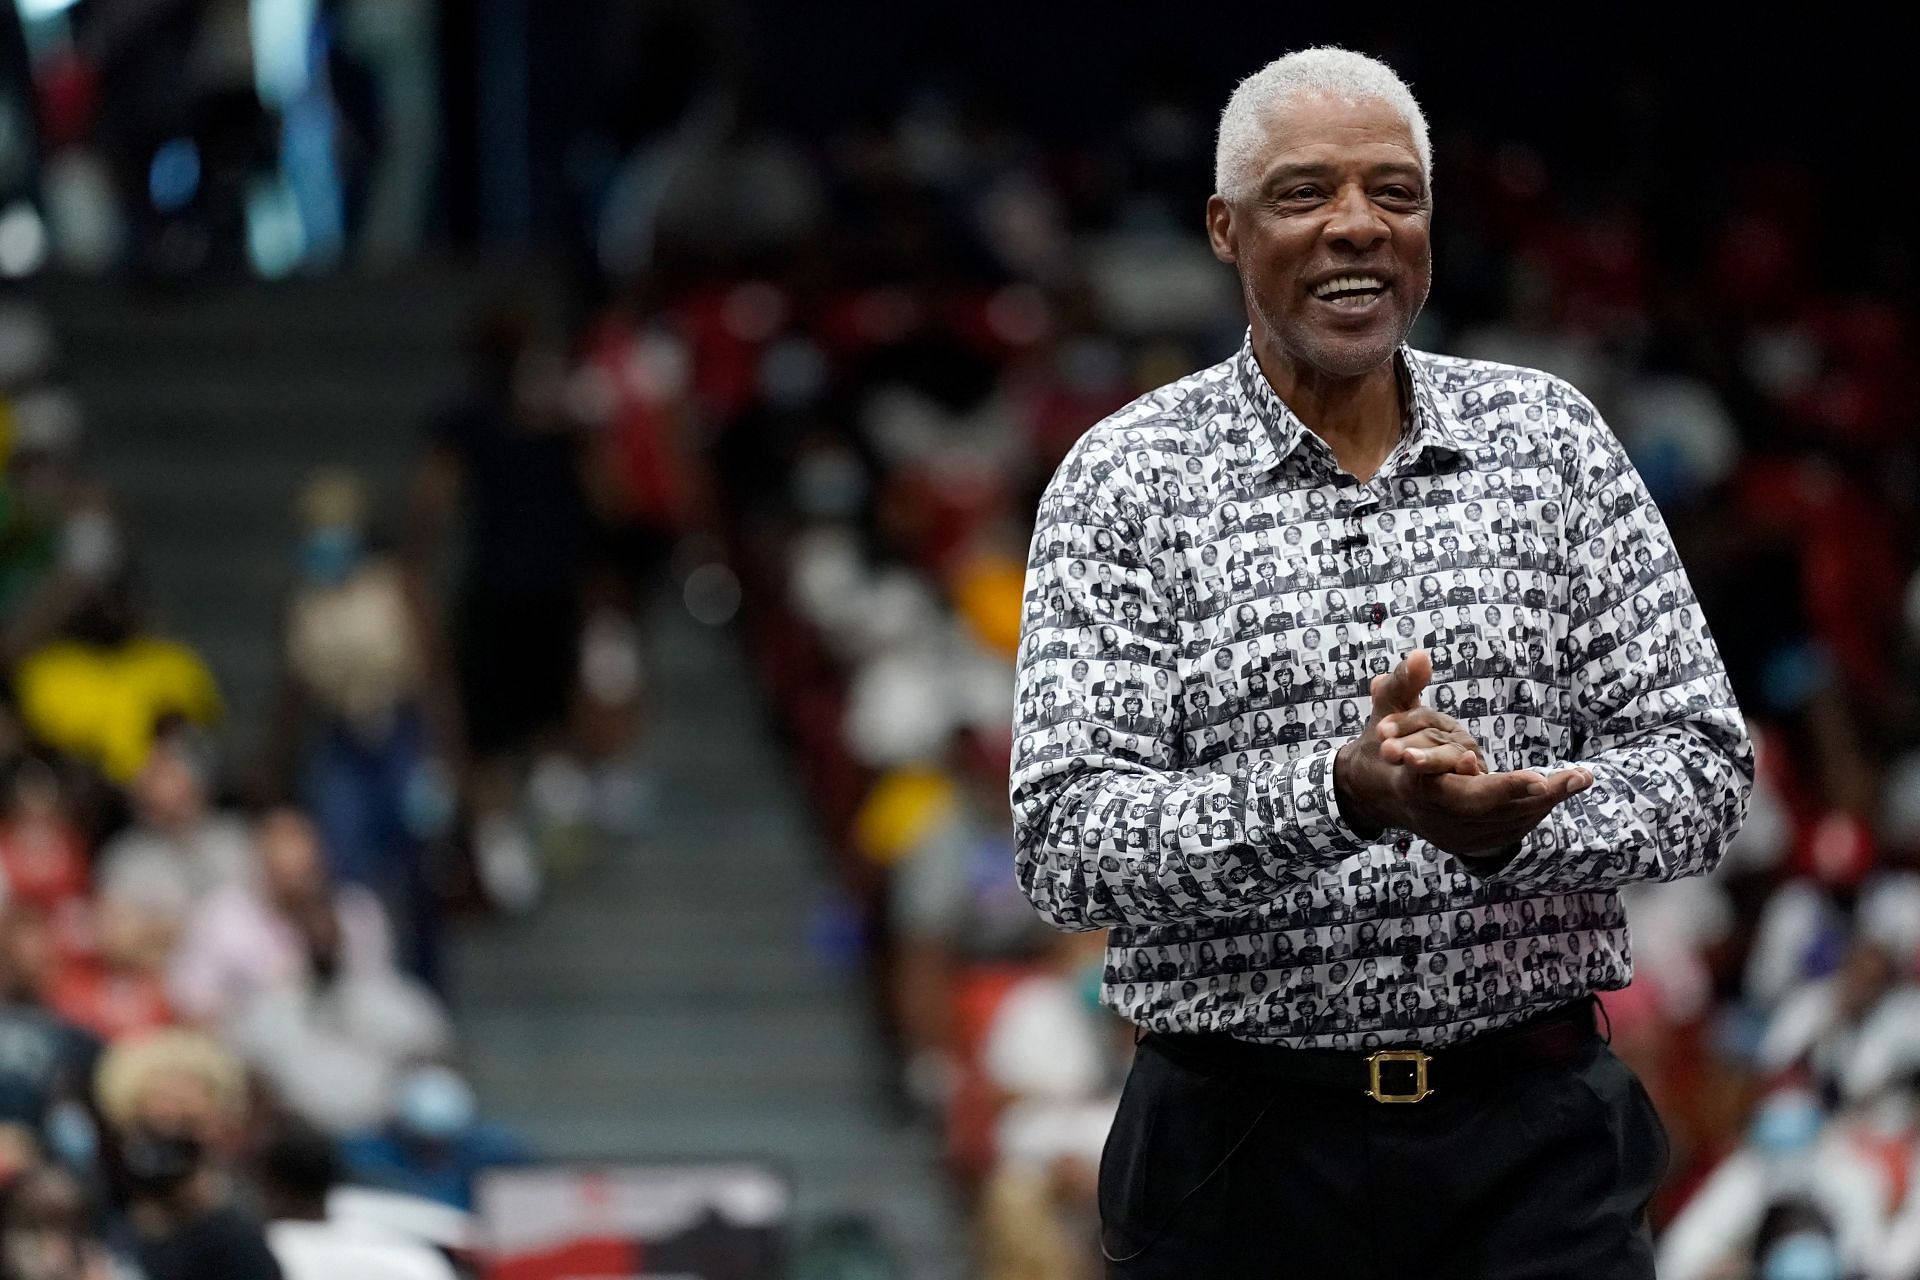 Coach Julius Erving of Tri State reacts during the game against the Ball Hogs during BIG3 - Week Six at Credit Union 1 Arena on August 07, 2021 in Chicago, Illinois.